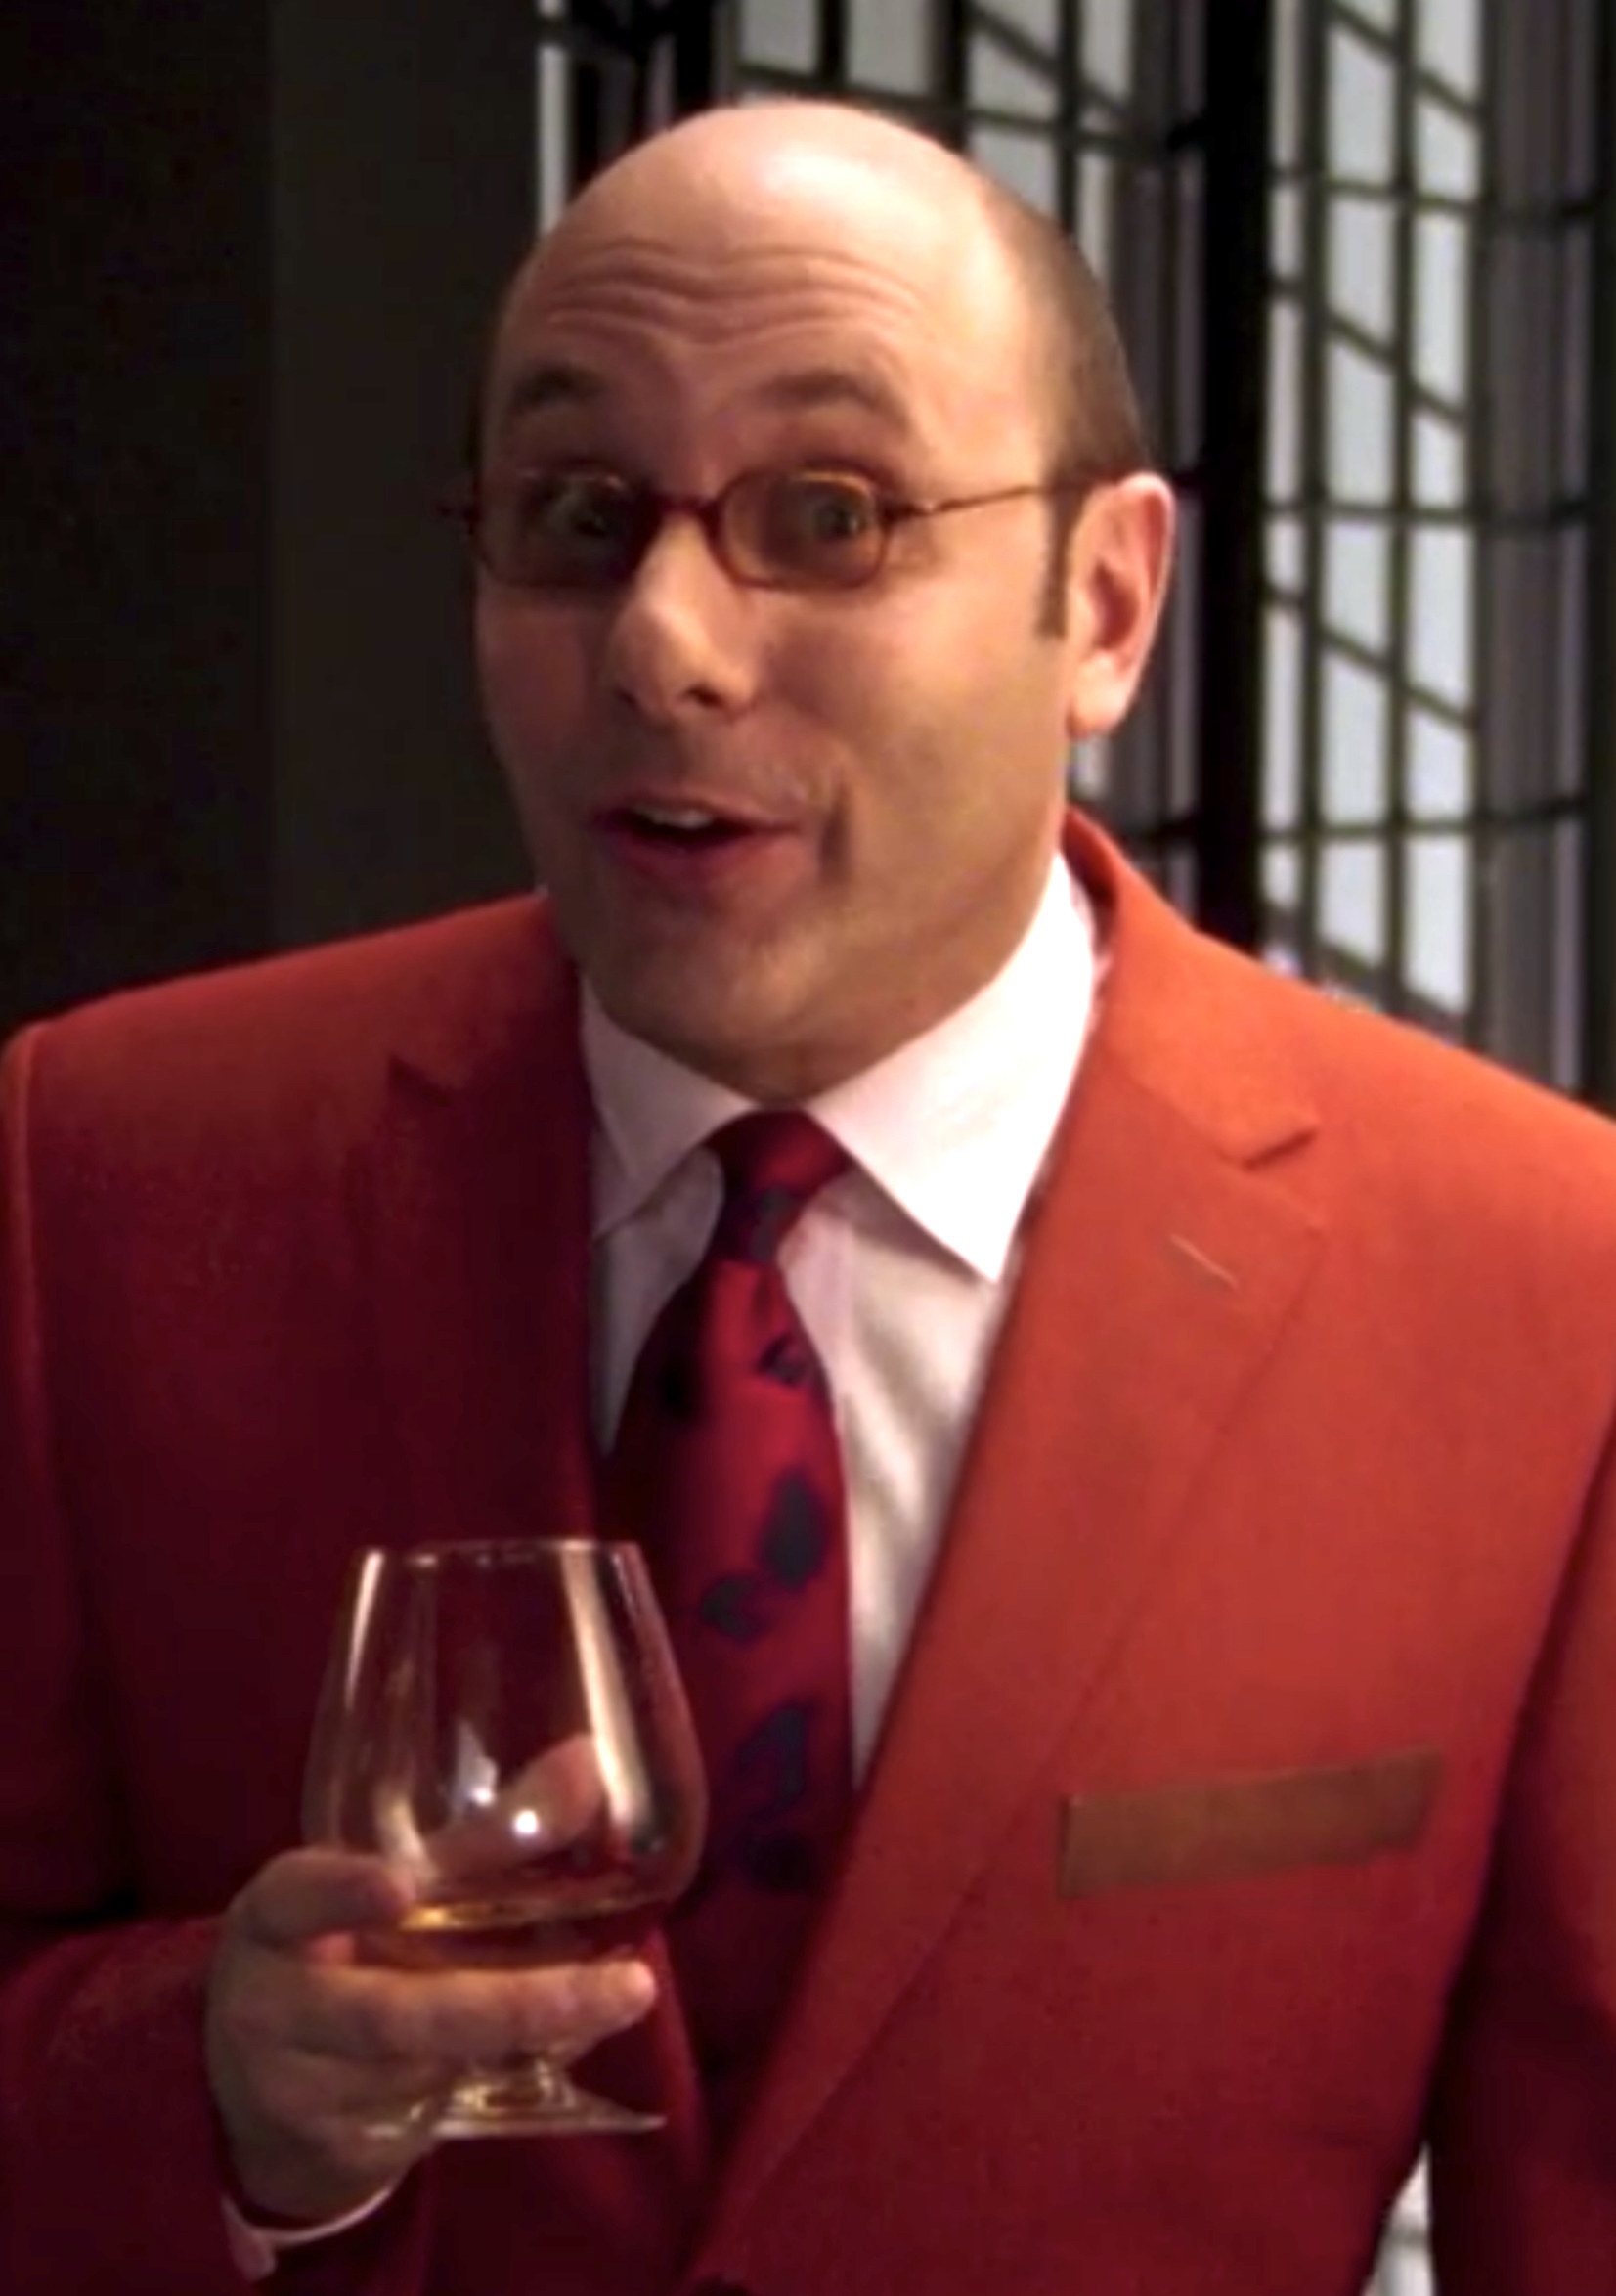 Garson wearing a bright-colored suit and glasses in his last episode of the series